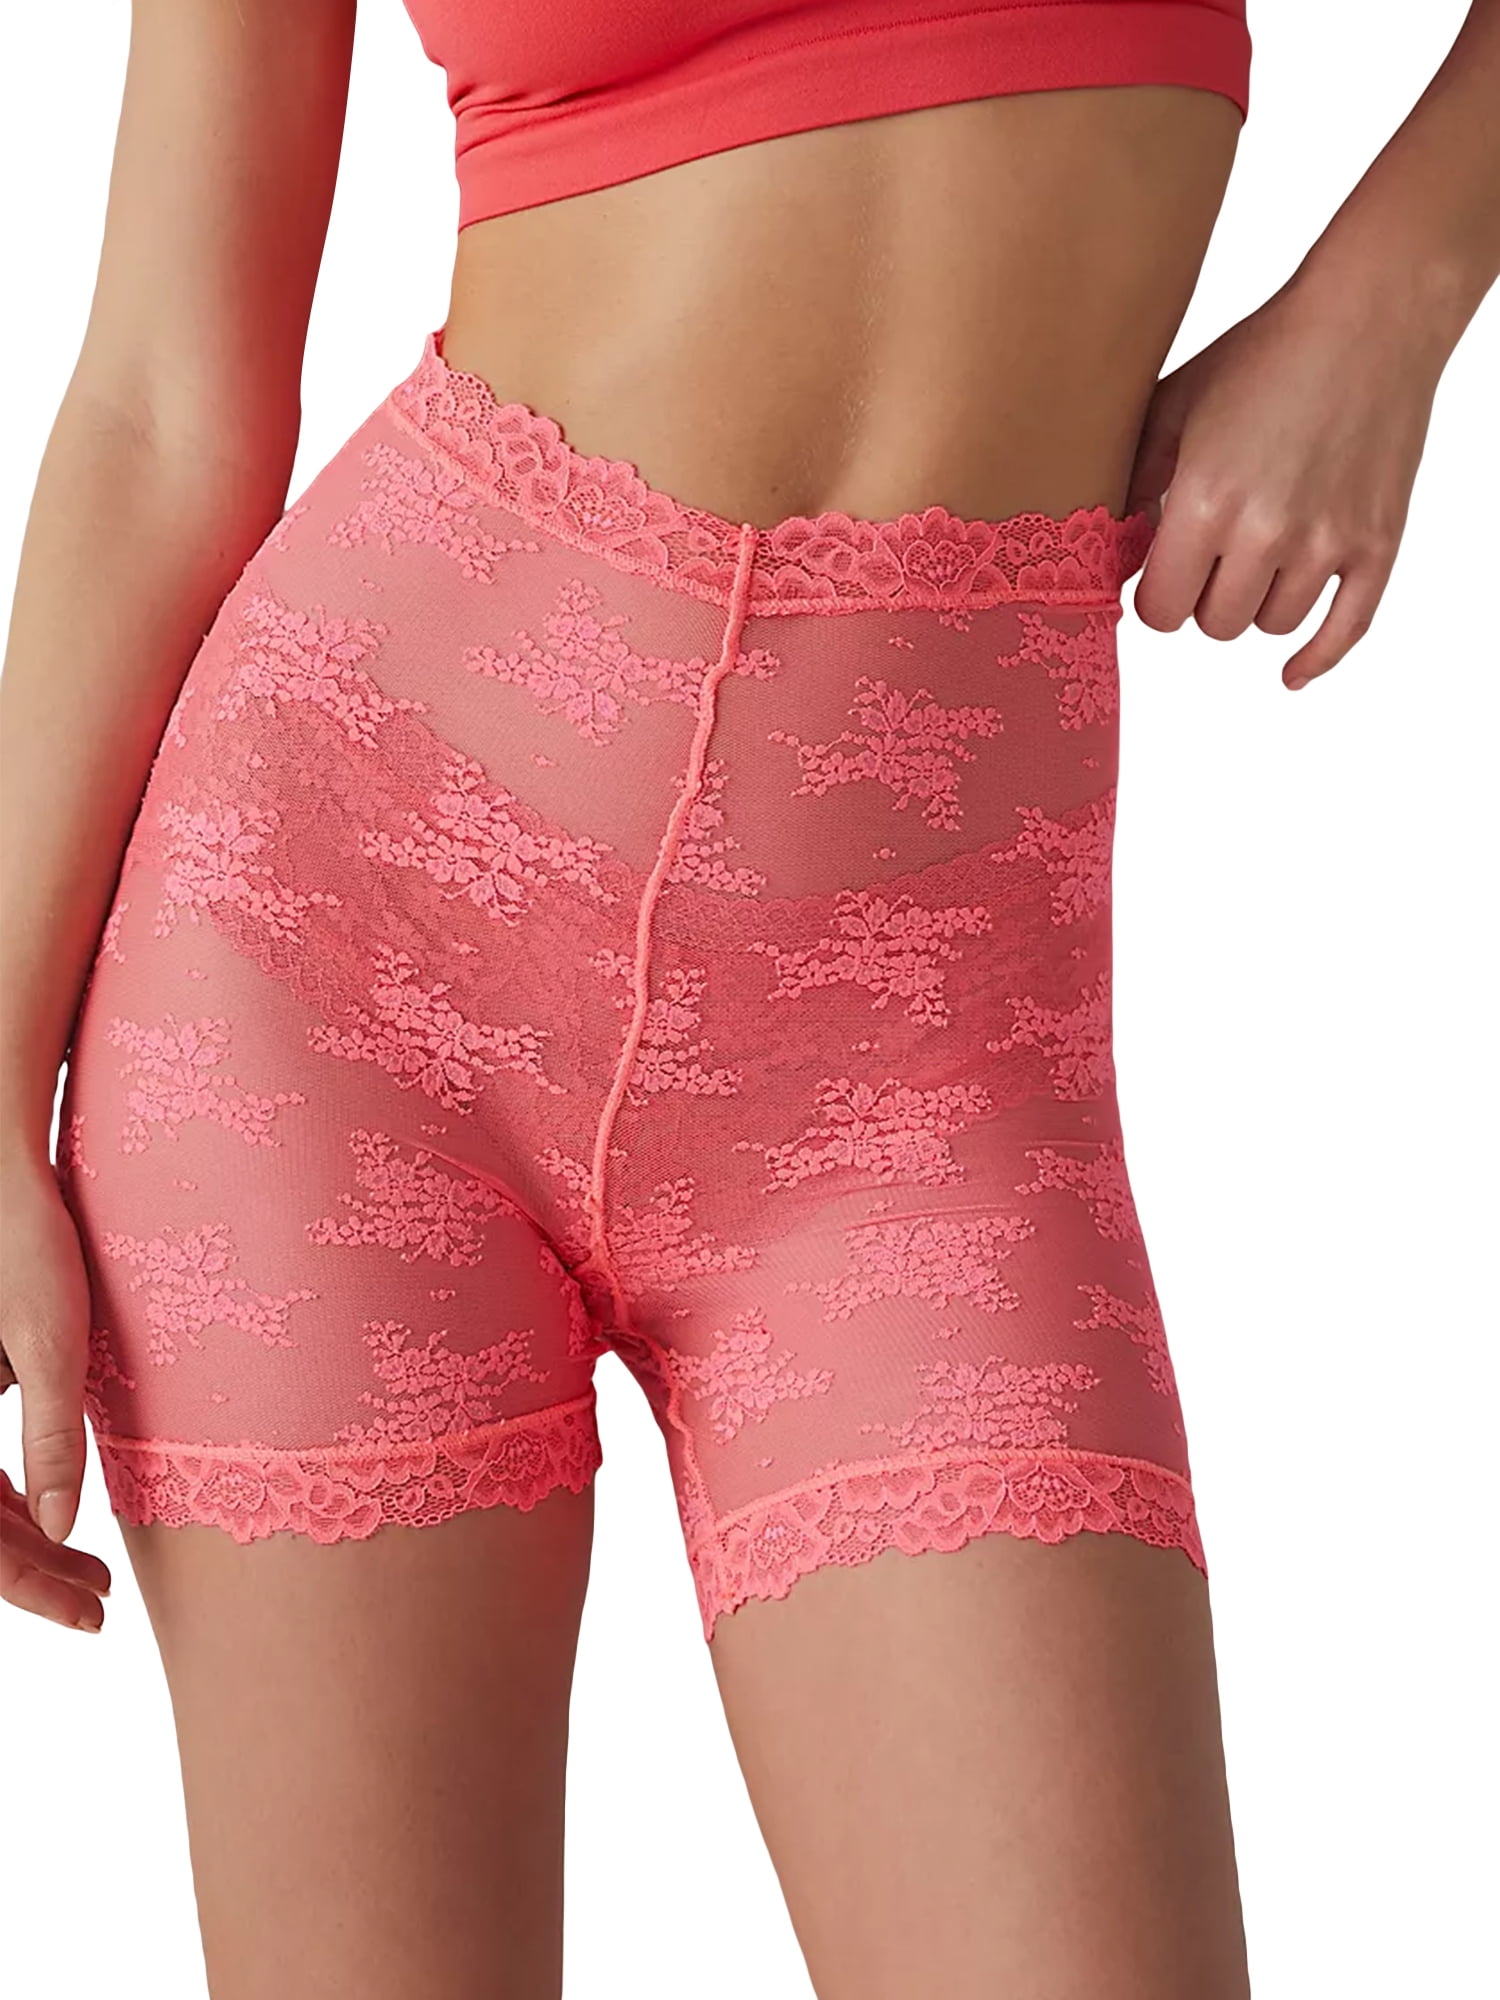 Women's Slip Shorts for Under Dresses Stretchy Lace Panties Soft High Waist  Mid-Thigh Anti-Chafing Panty Shorts Underwear